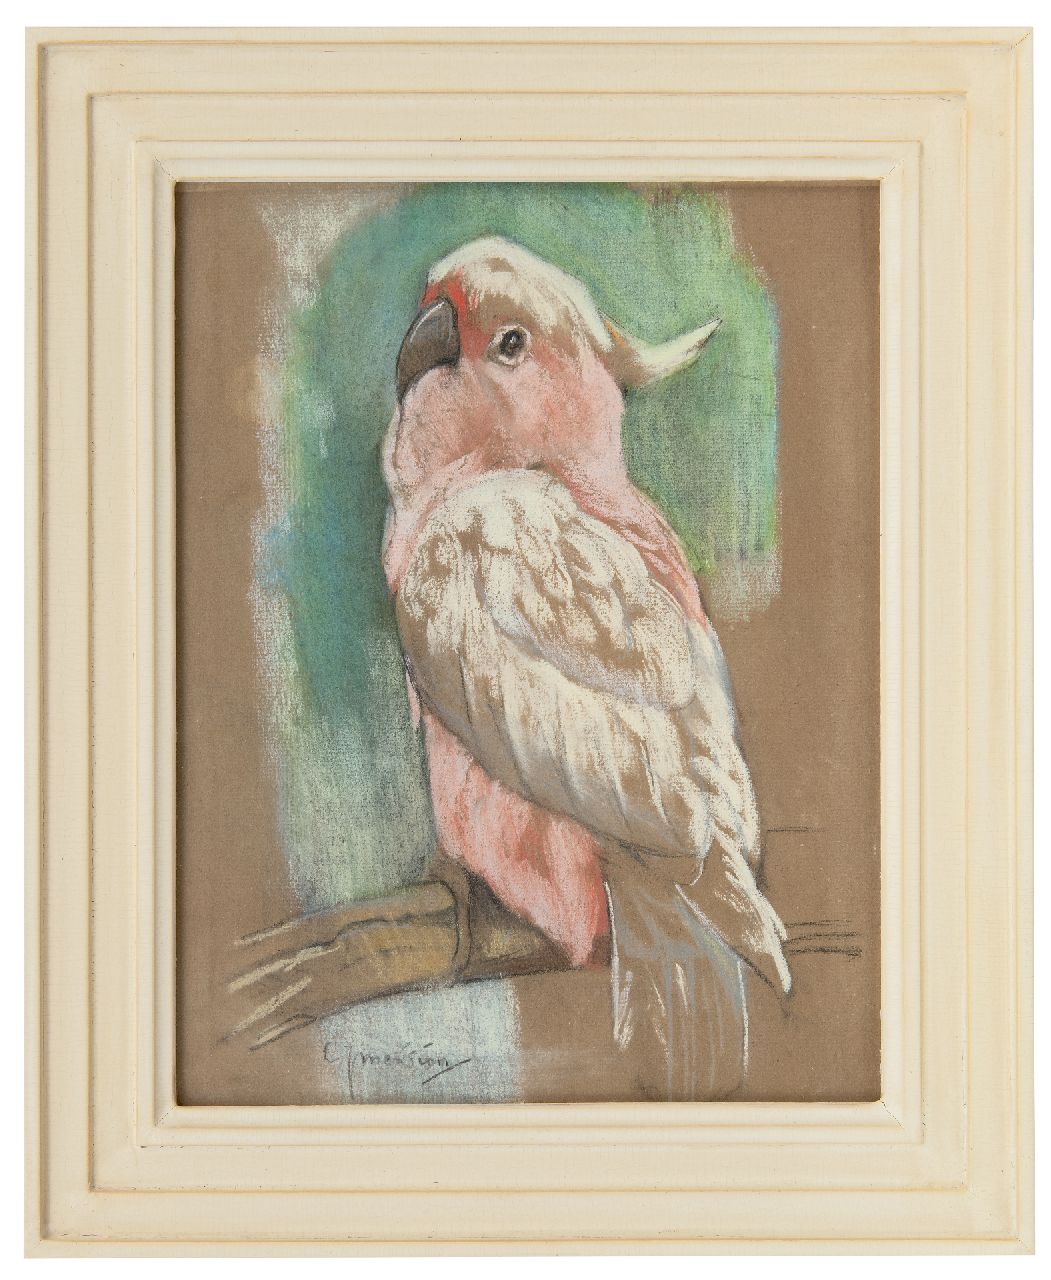 Mension C.J.  | Cornelis Jan Mension | Watercolours and drawings offered for sale | Pink cockatoo, pastel on paper 31.1 x 23.7 cm, signed l.l.